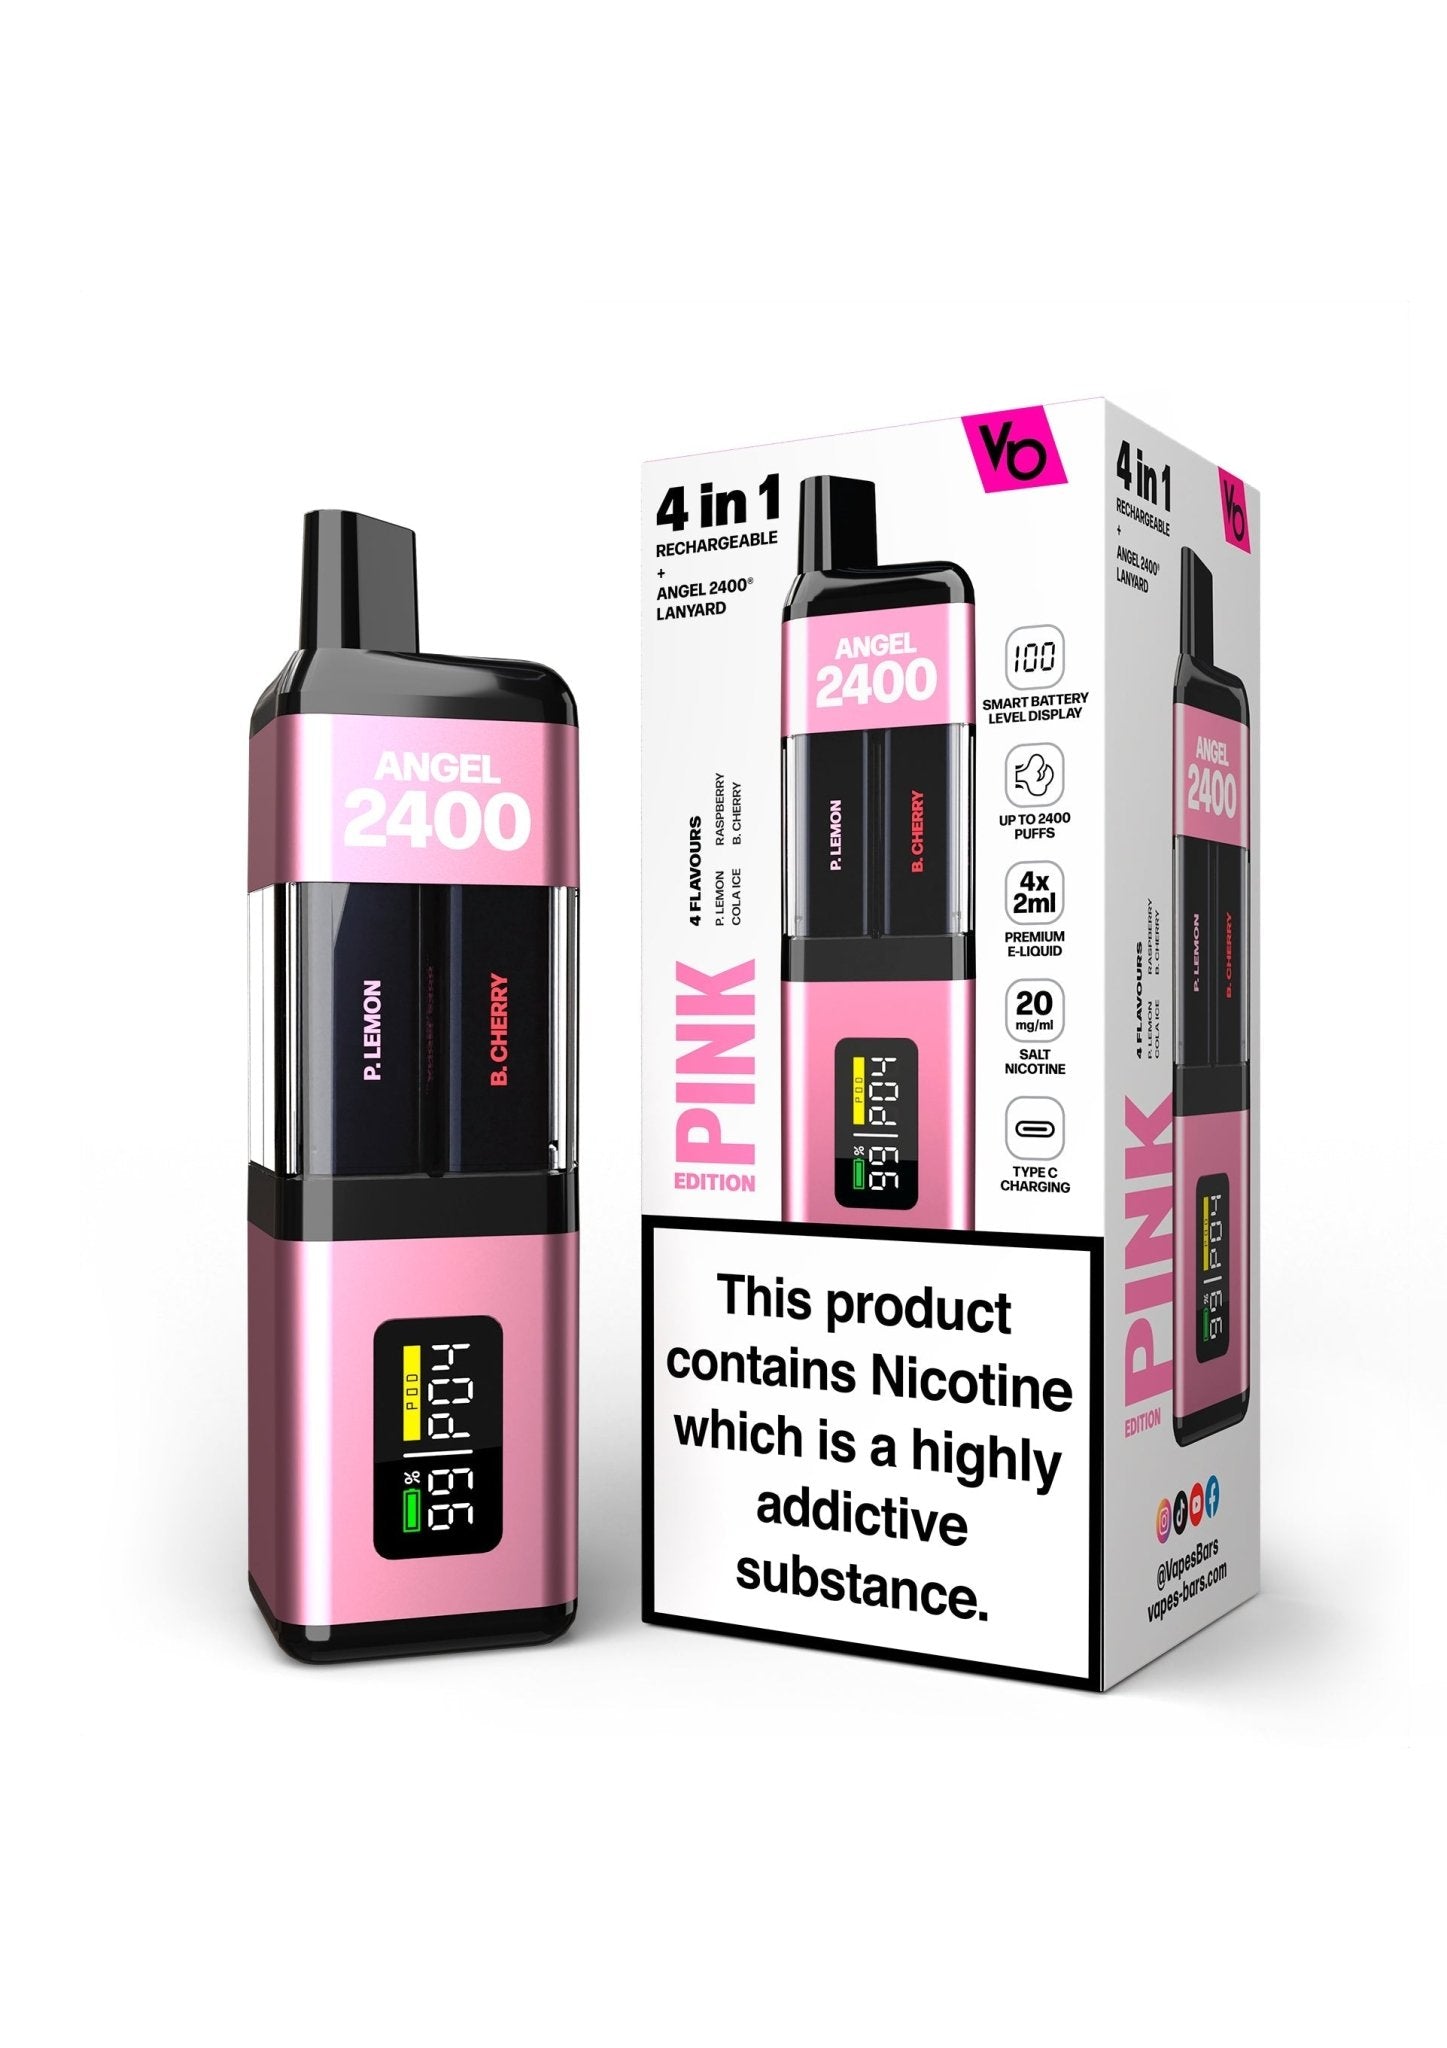 Angel 2400 Puffs Disposble Vape by Vapes Bars - Wolfvapes.co.uk-Pink Edition (Multi Flavour)